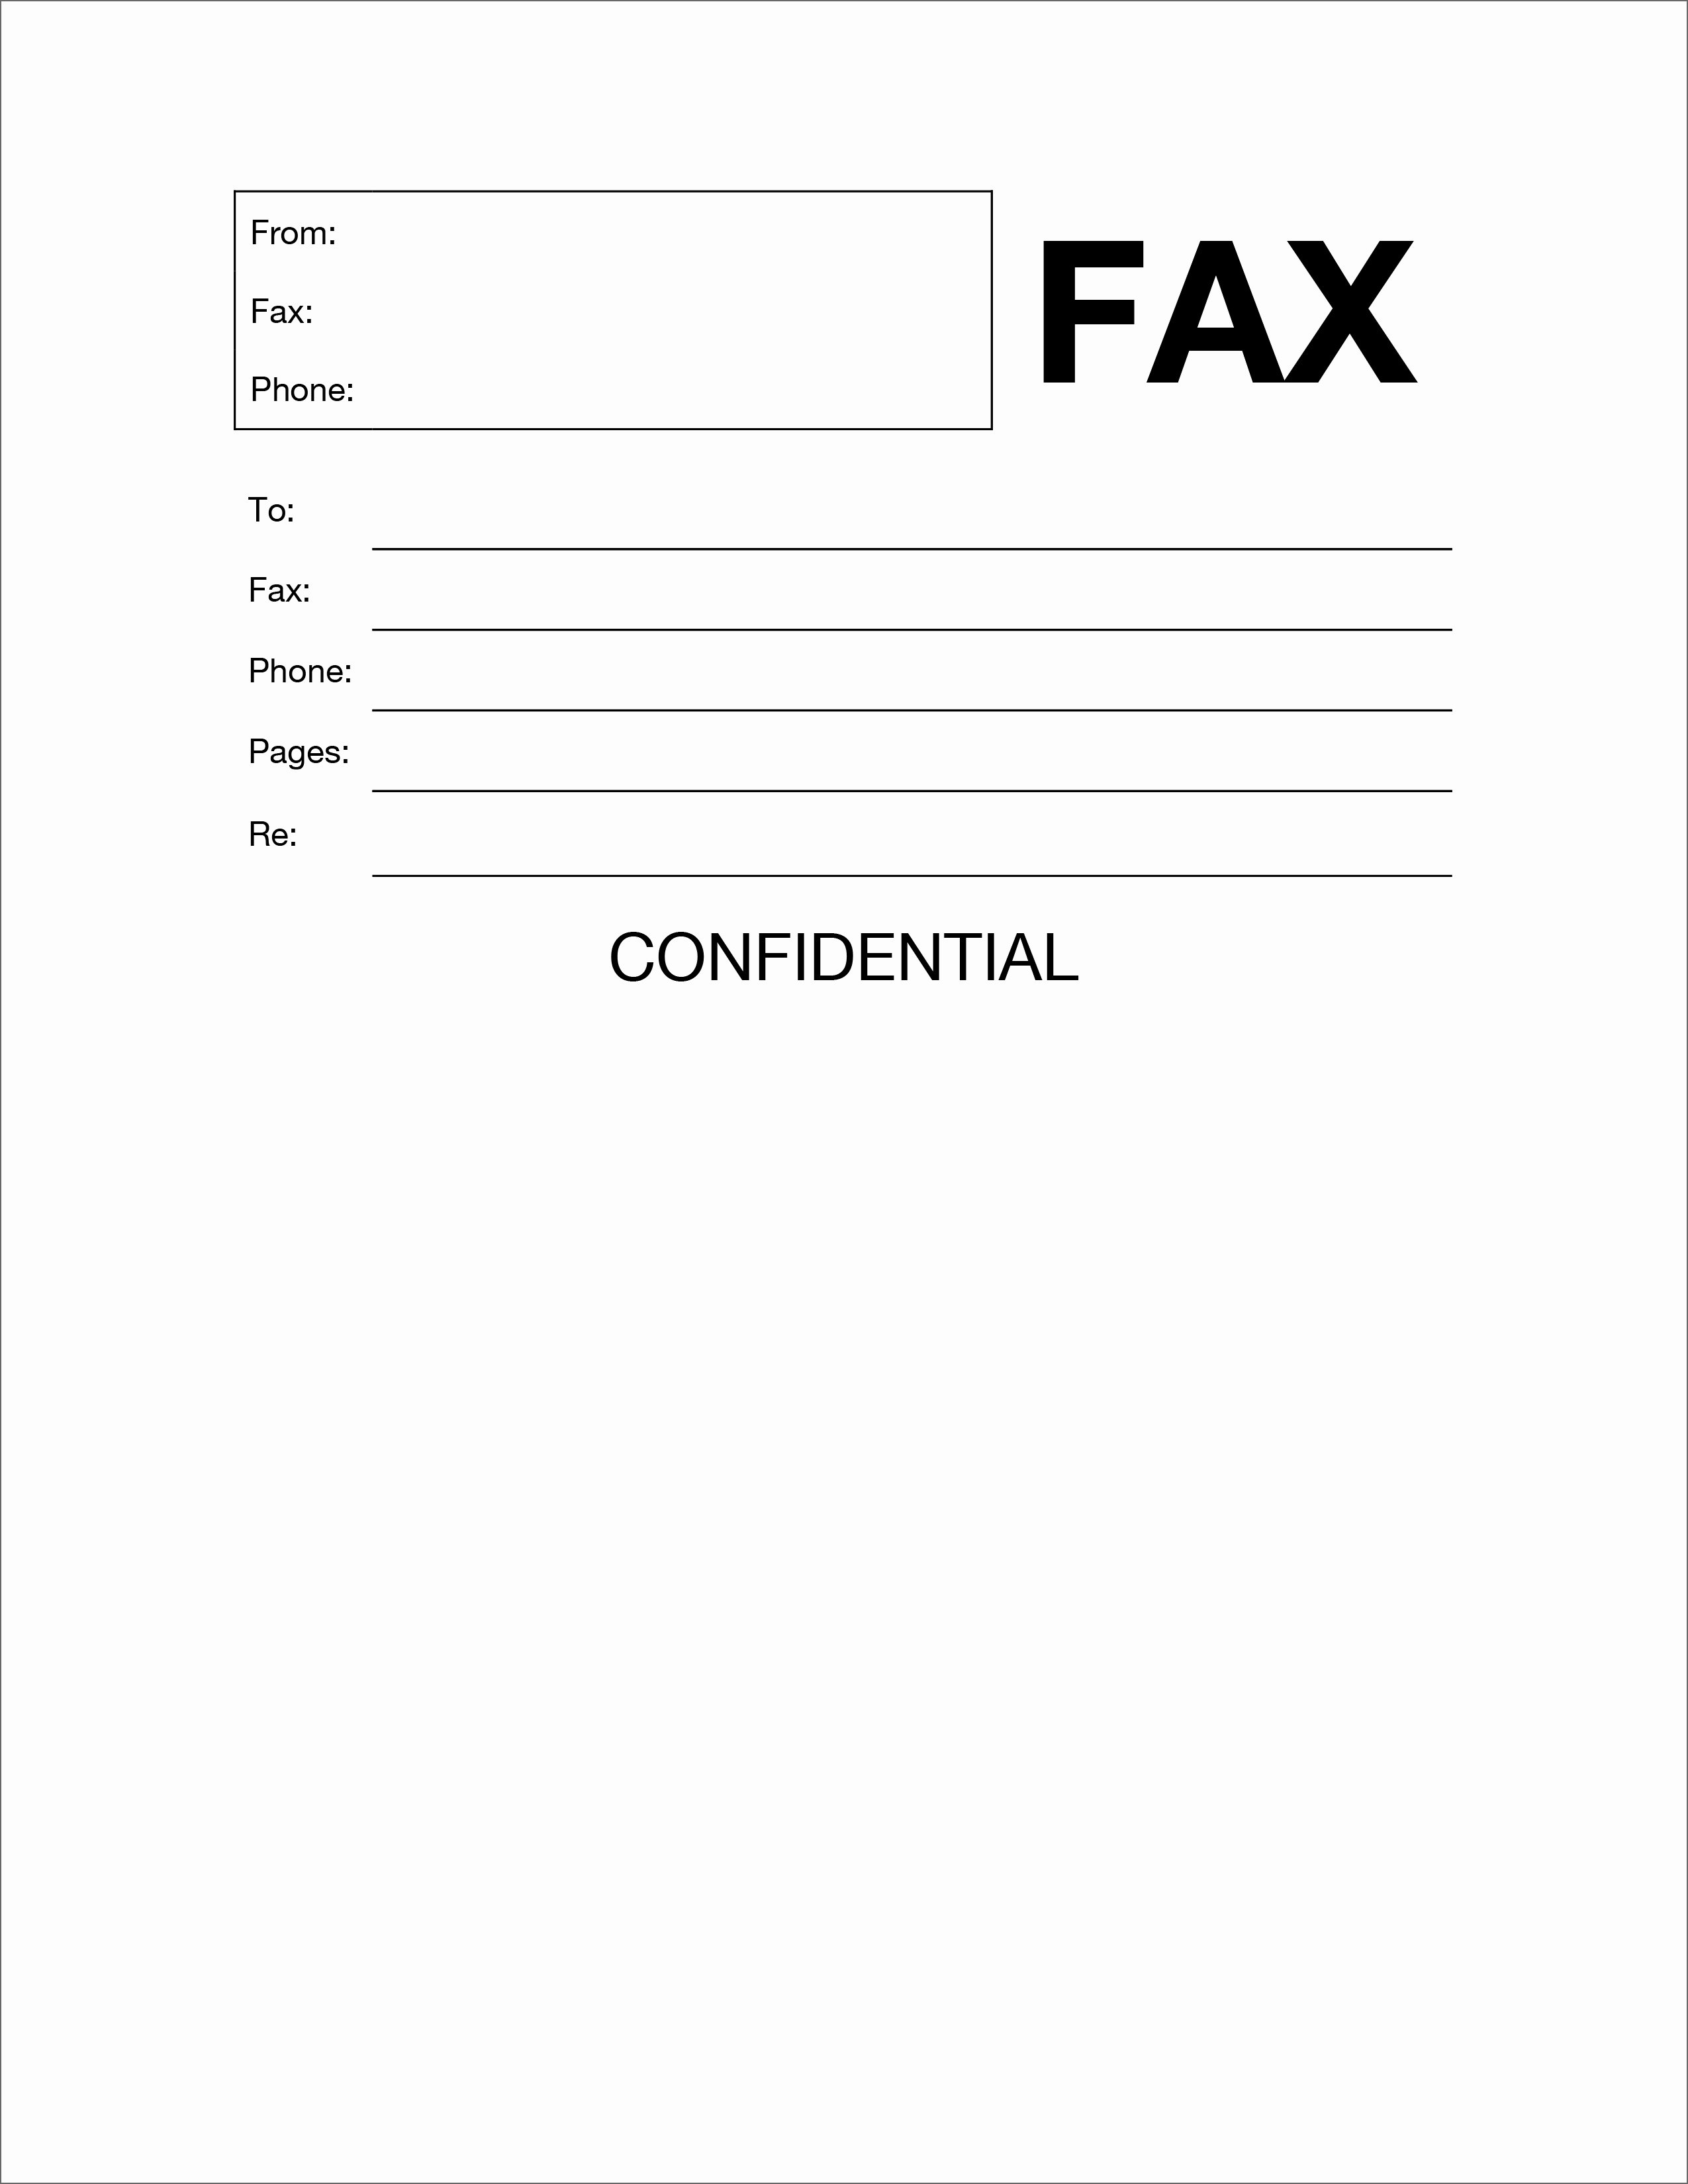 Fax Cover Sheet Template Word New 20 Free Fax Cover Templates Sheets In Microsoft Fice Docx